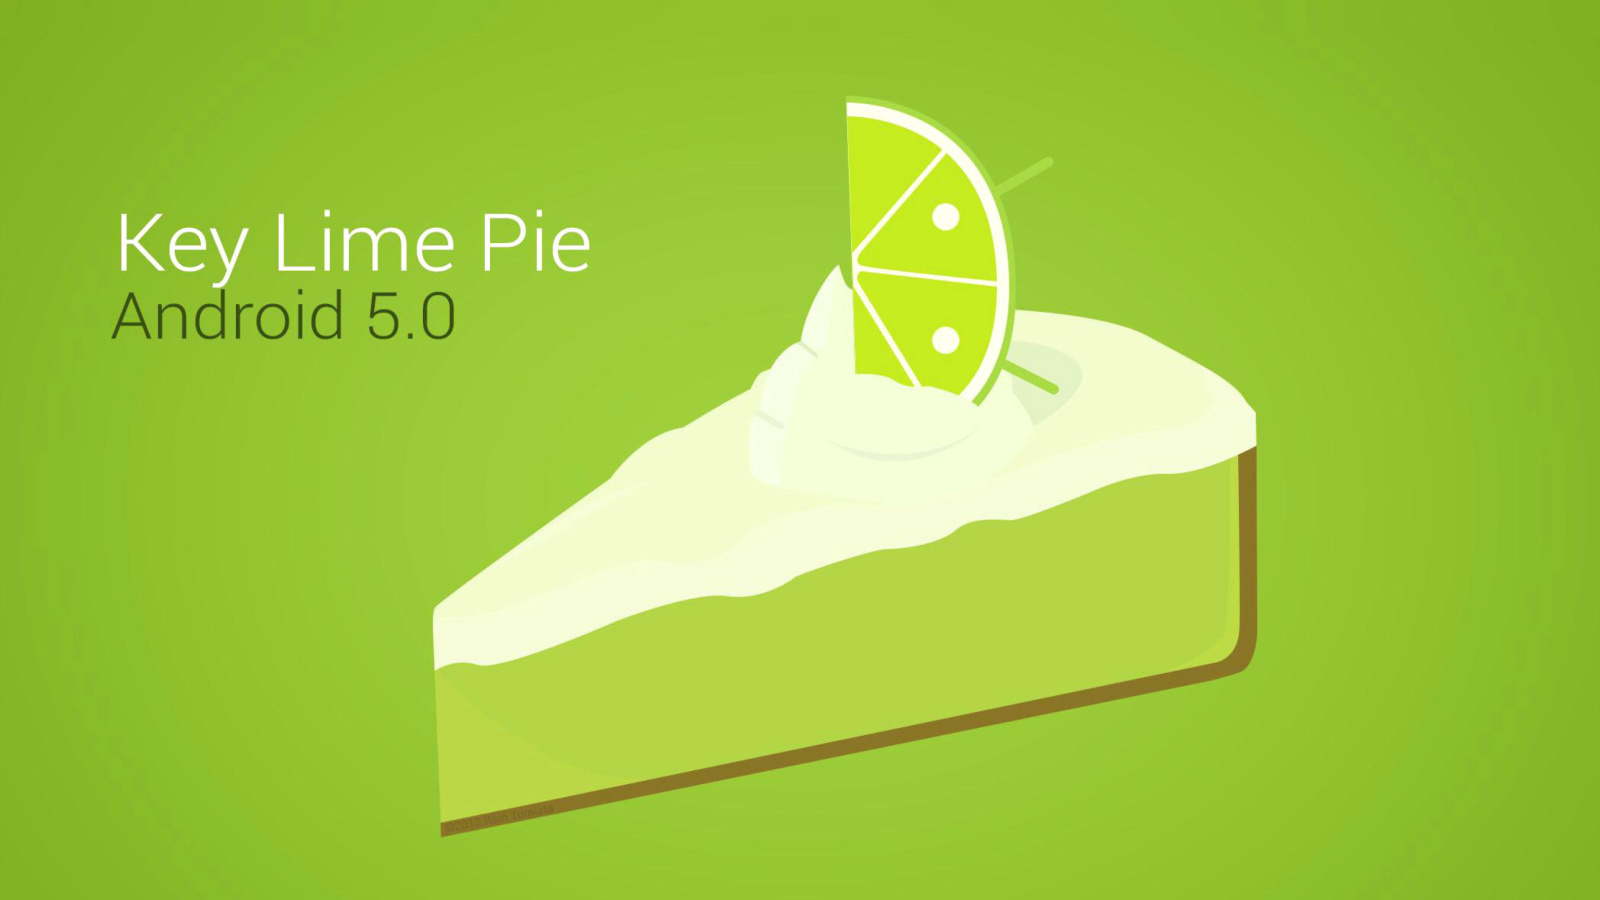 Concept Android 5.0 Key Lime Pie wallpaper 1600x900